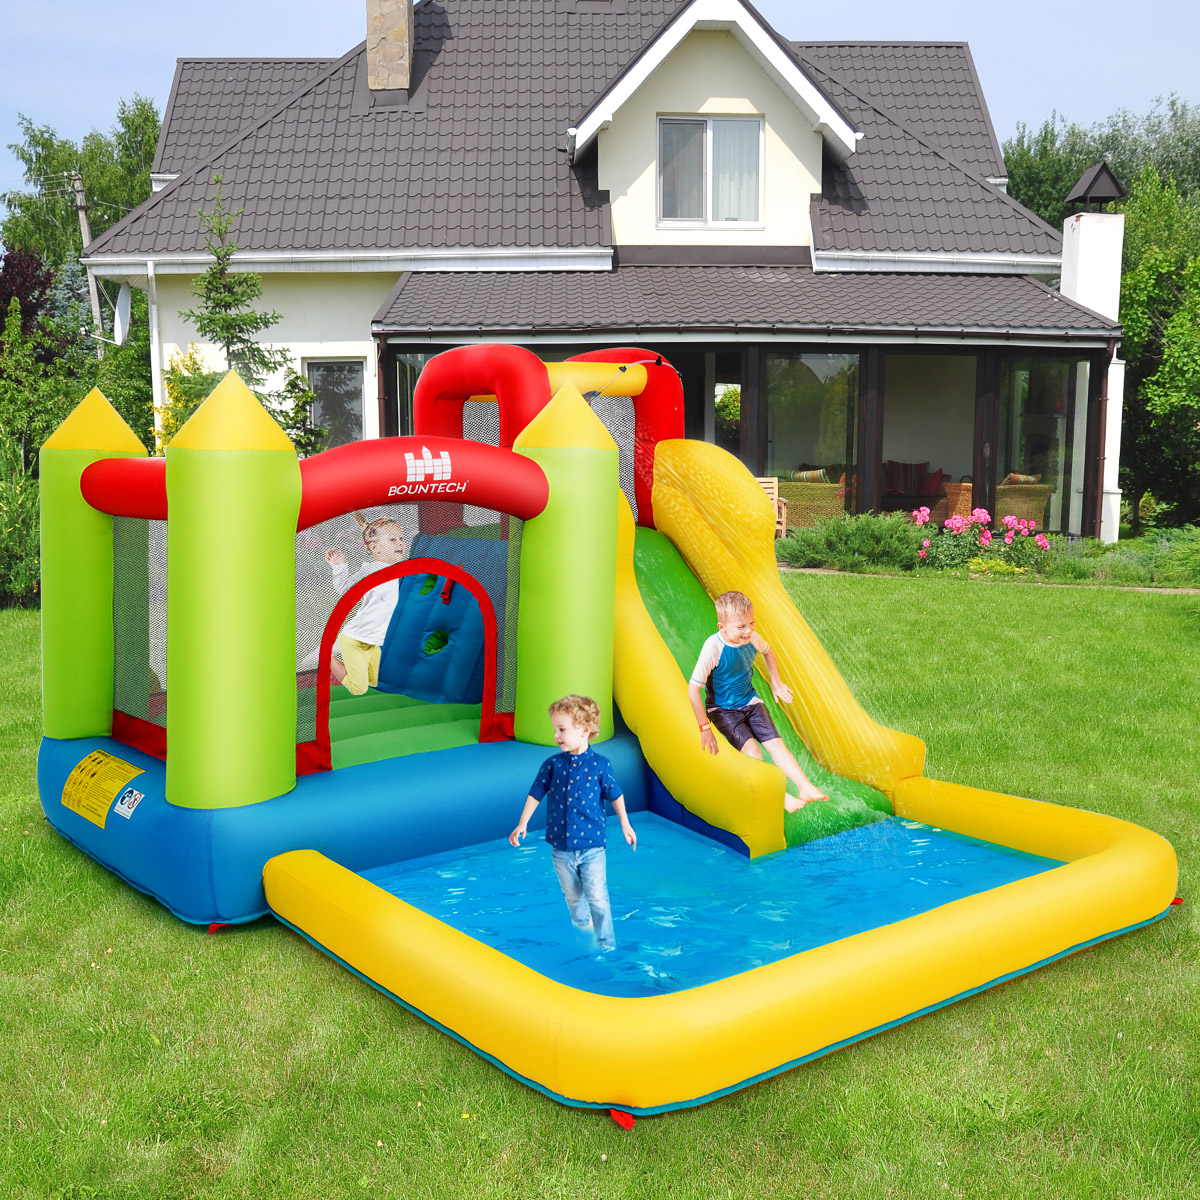 Costway Inflatable Bounce House Water Slide Jump Bouncer Climbing Wall Splash Pool Blower Excluded - image 3 of 10